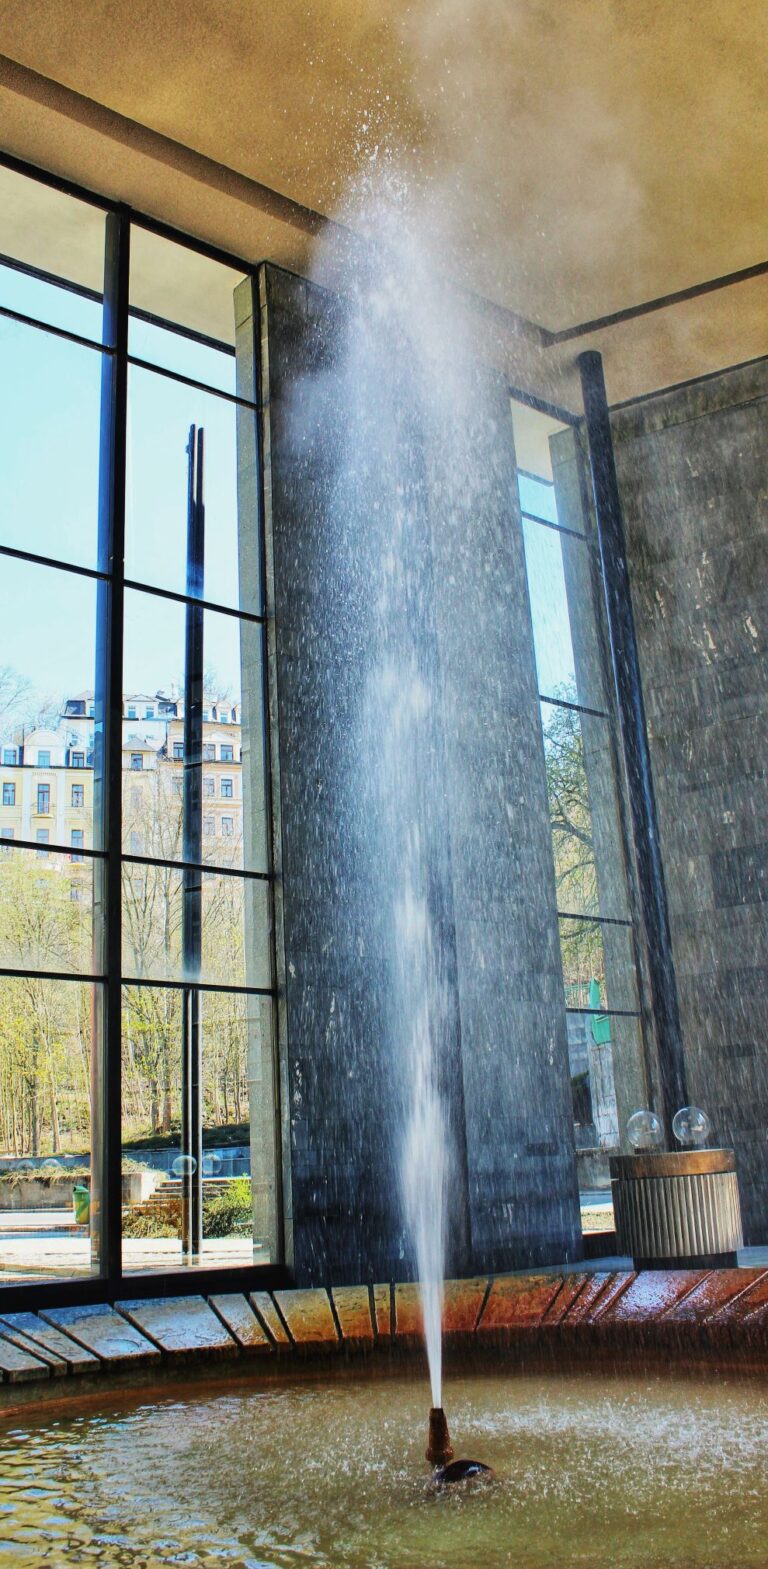 The Hot Spring Colonnade is in a more modern concrete-and-glass structure built in 1975. This impressive geyser which spurts water 12 meters into the air can be found in the spa town of Karlovy Vary in the Czech Republic